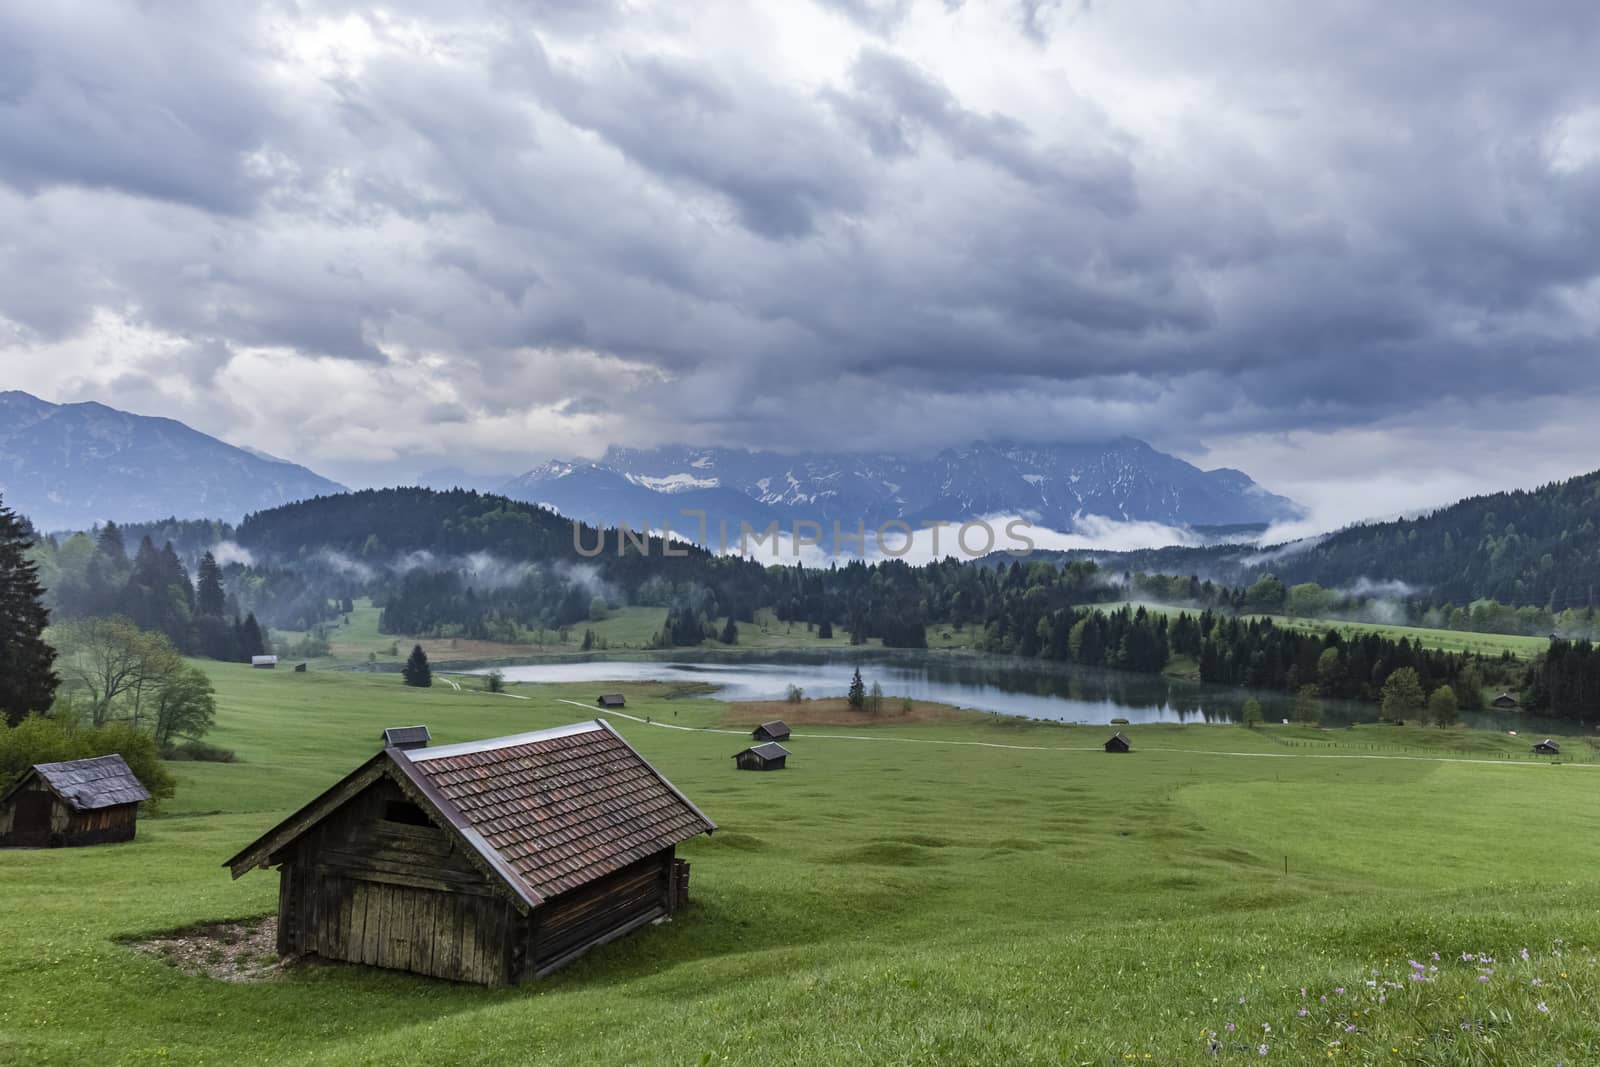 View on Geroldsee in Bavaria from a hill with heavy clouds in the sky